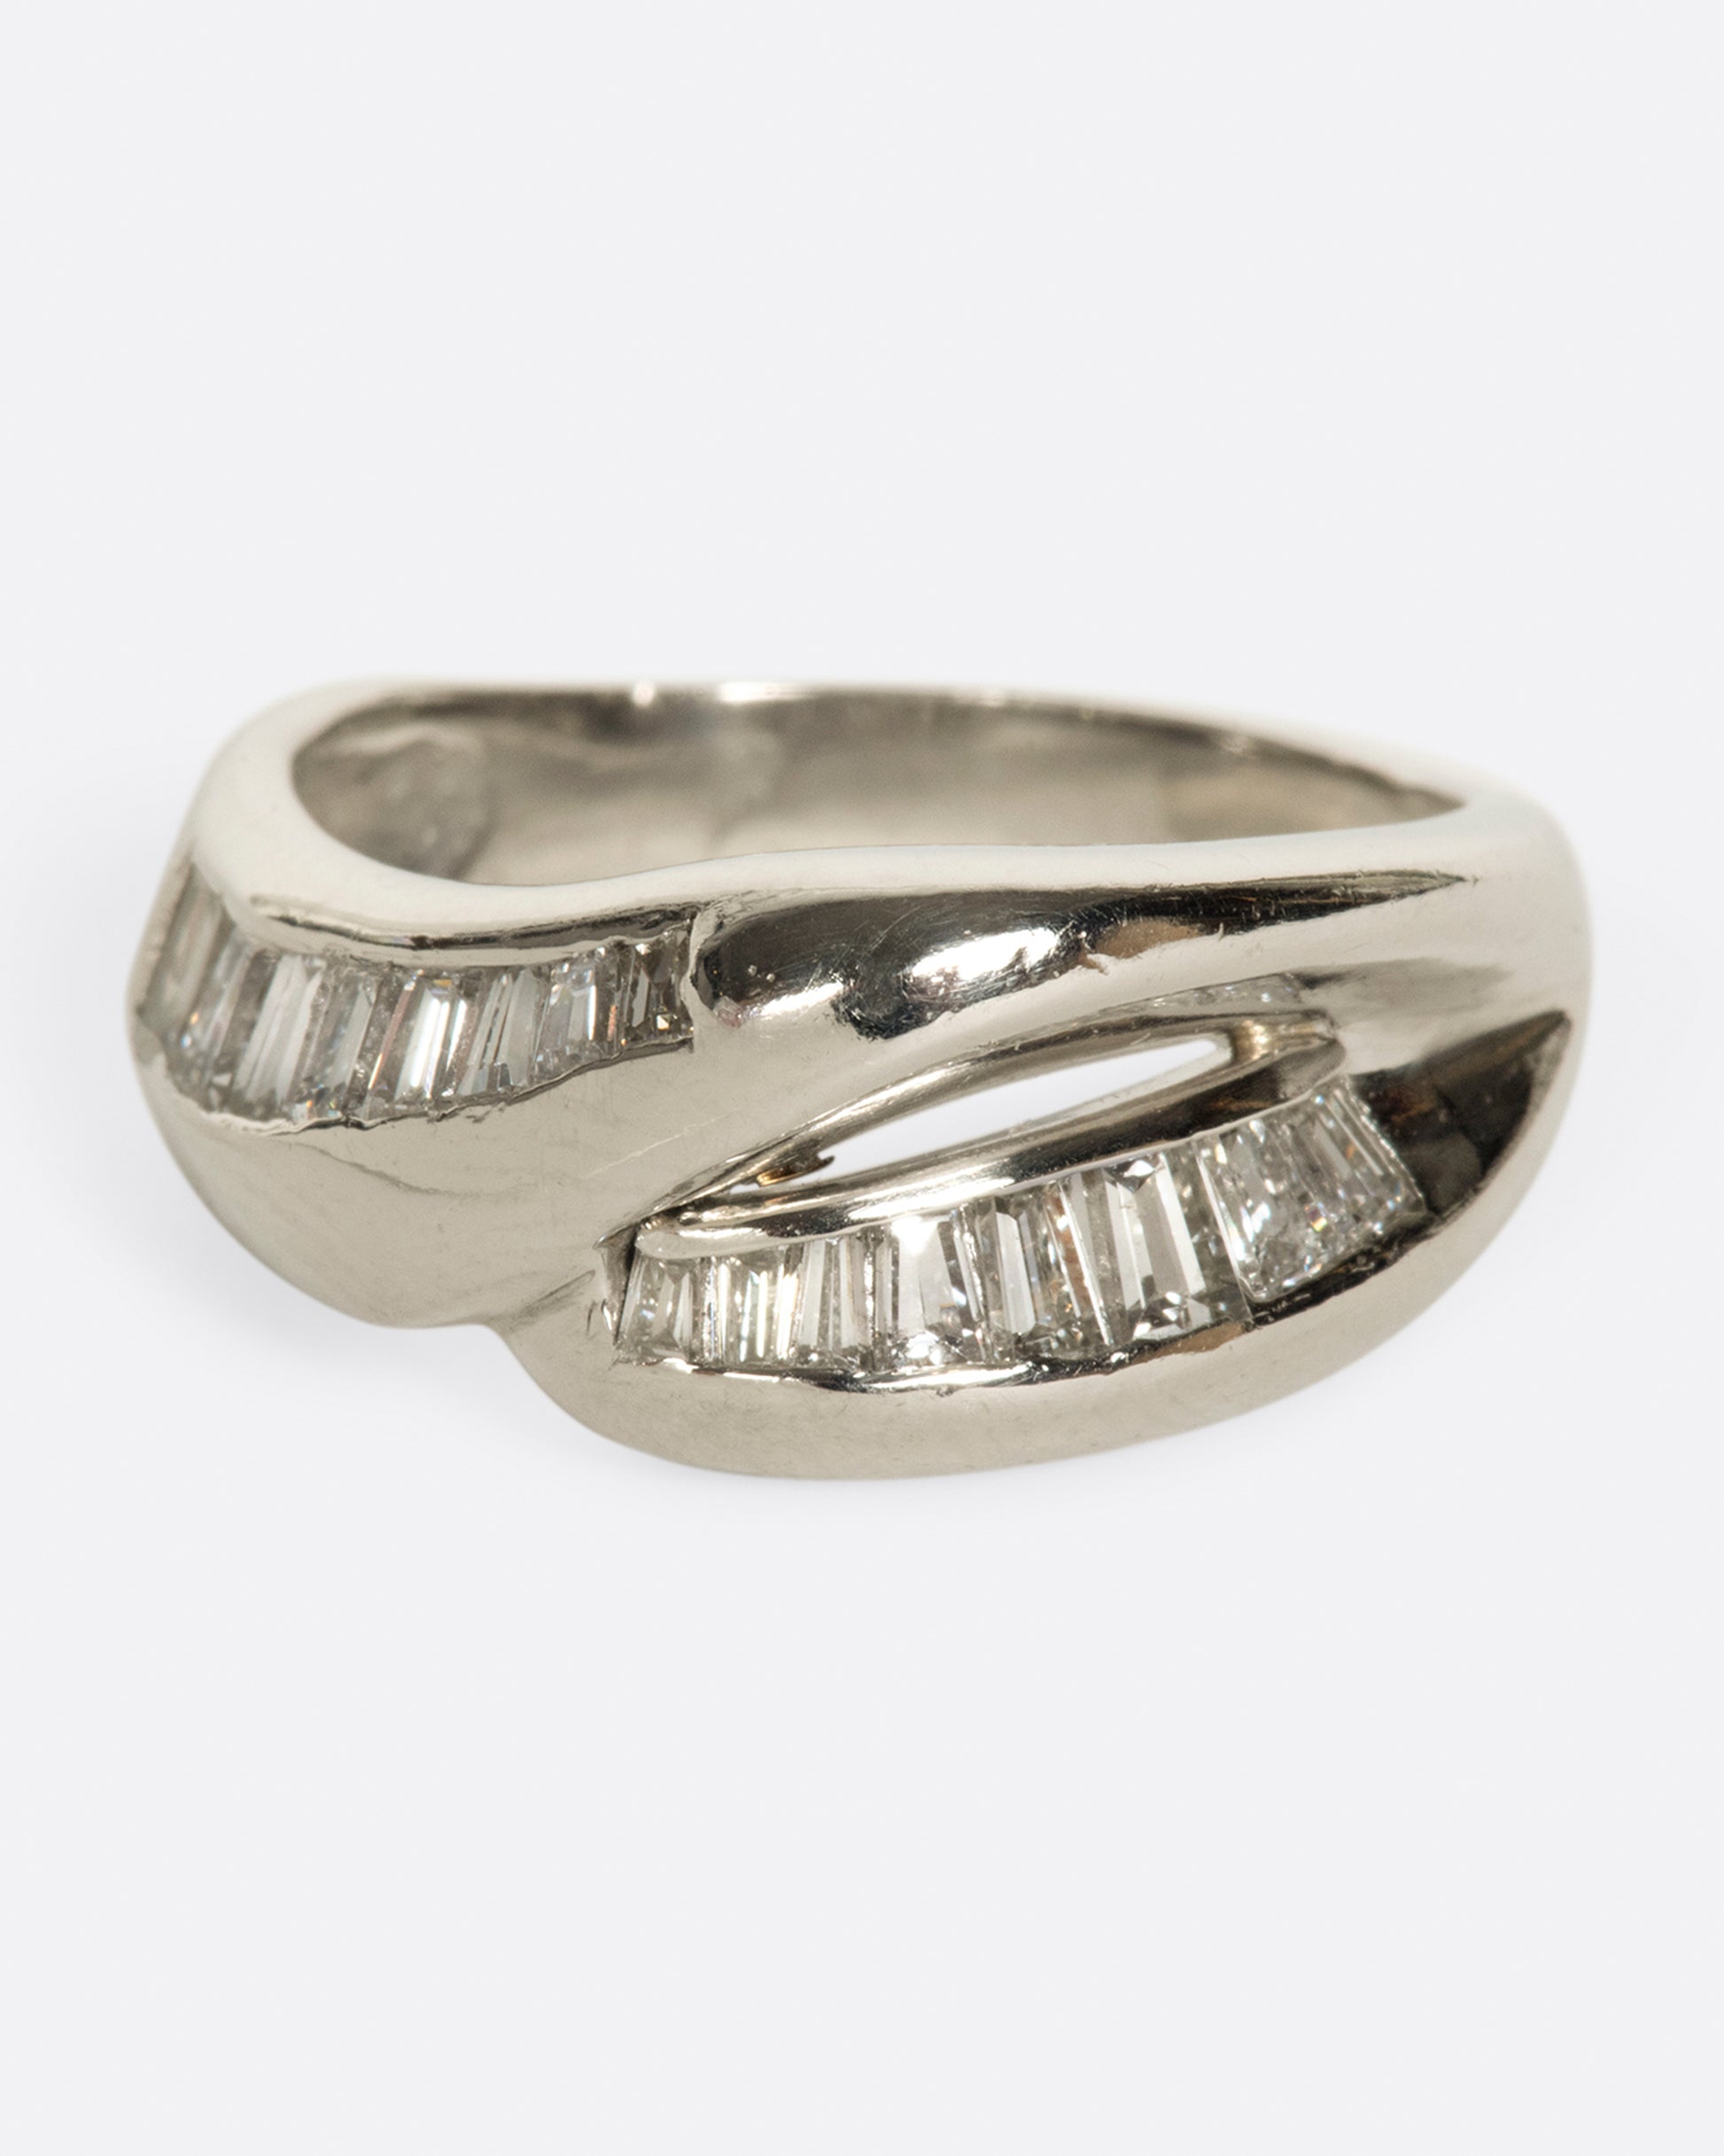 A platinum ring with two arches, lined with baguette diamonds.